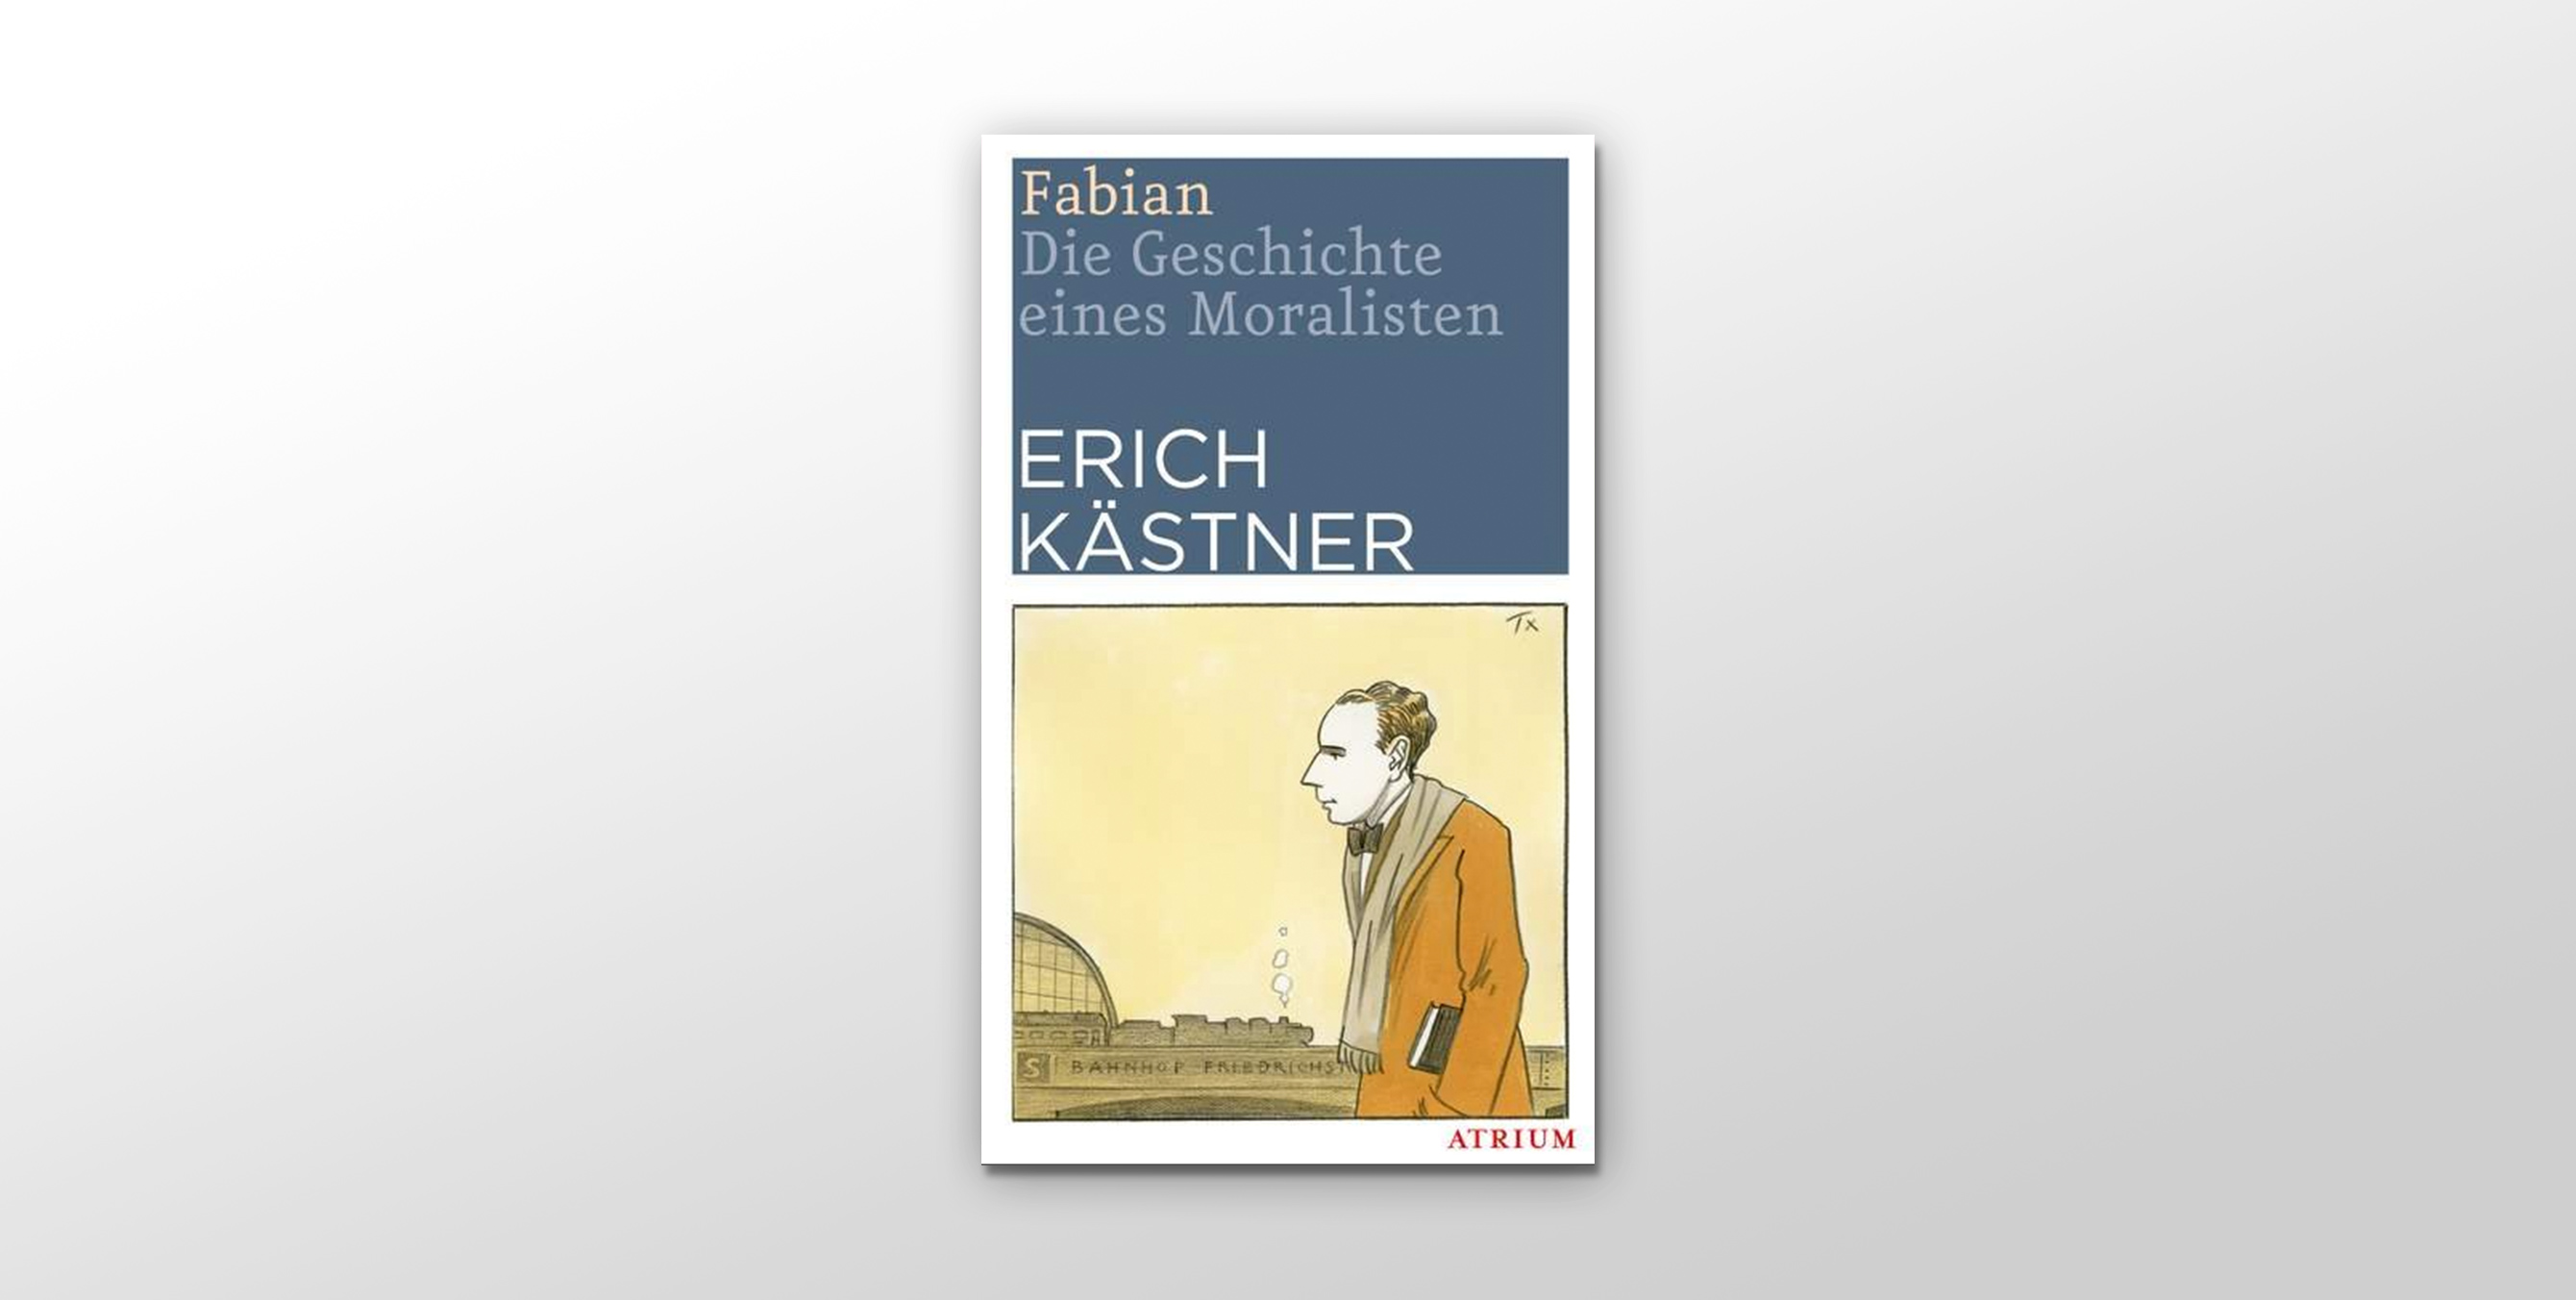 Book cover "Fabian. The story of a moralist" by Erich Kästner.